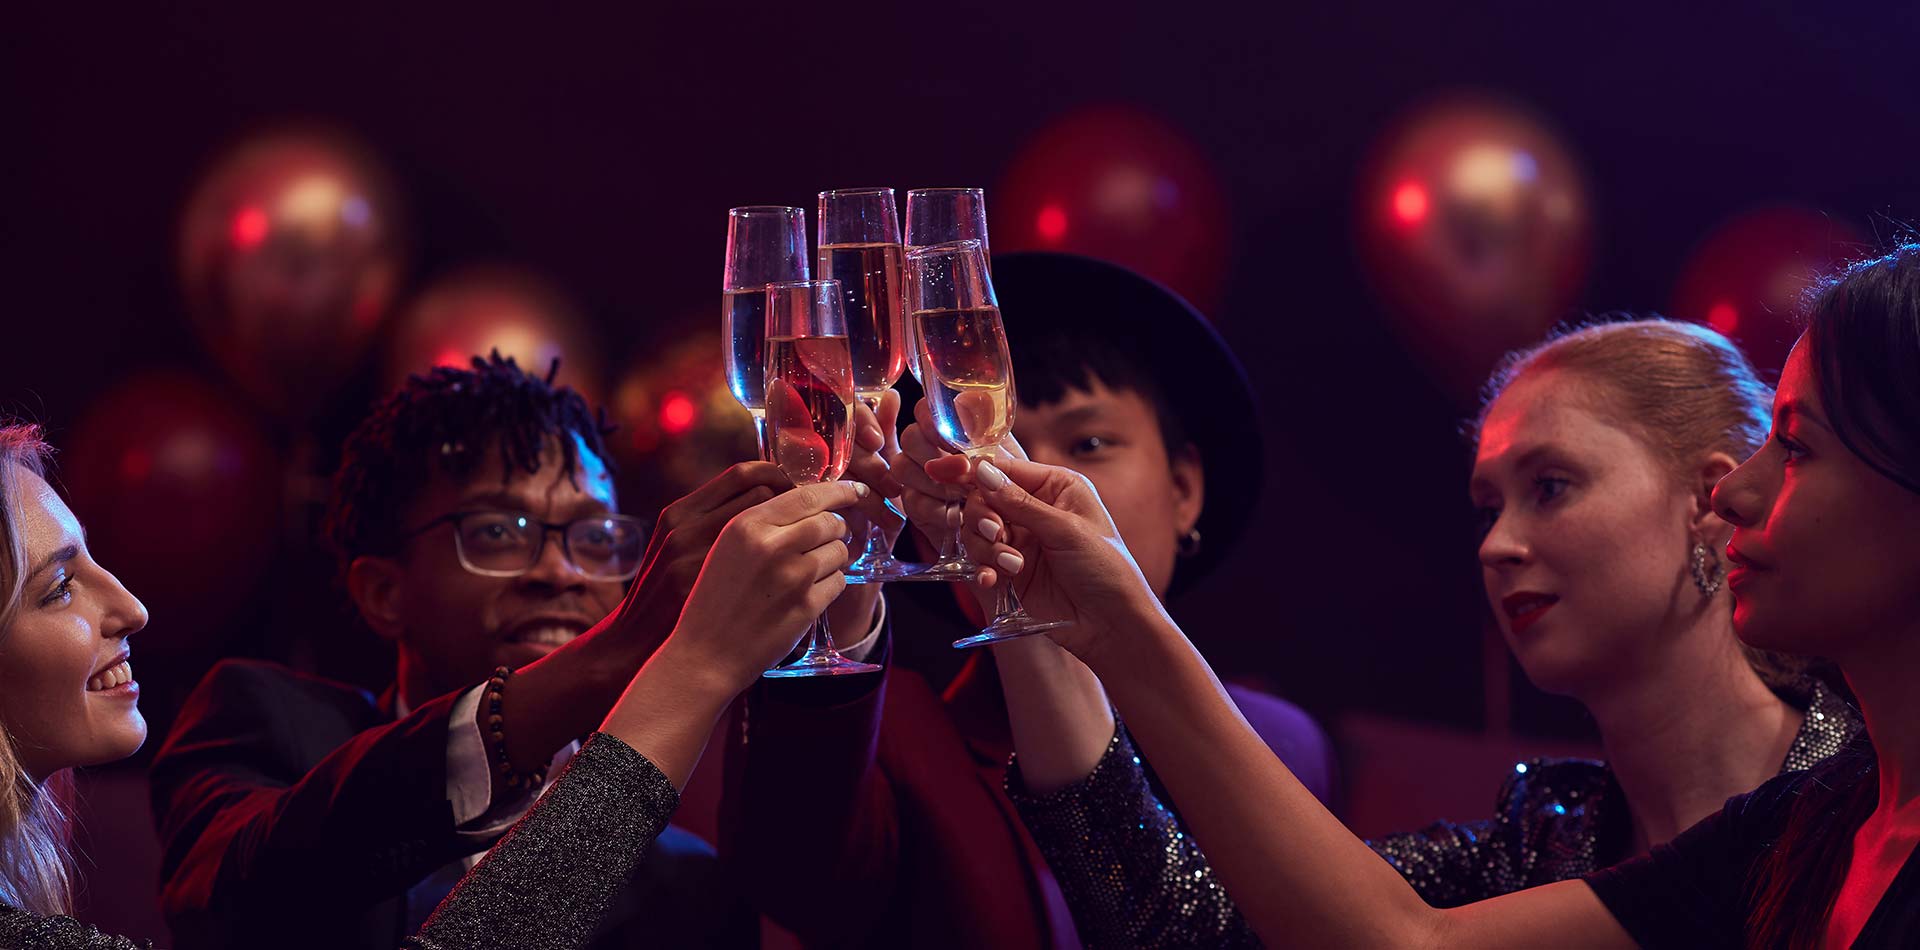 Group of elegant young people raising champagne glasses while enjoying party in nightclub.